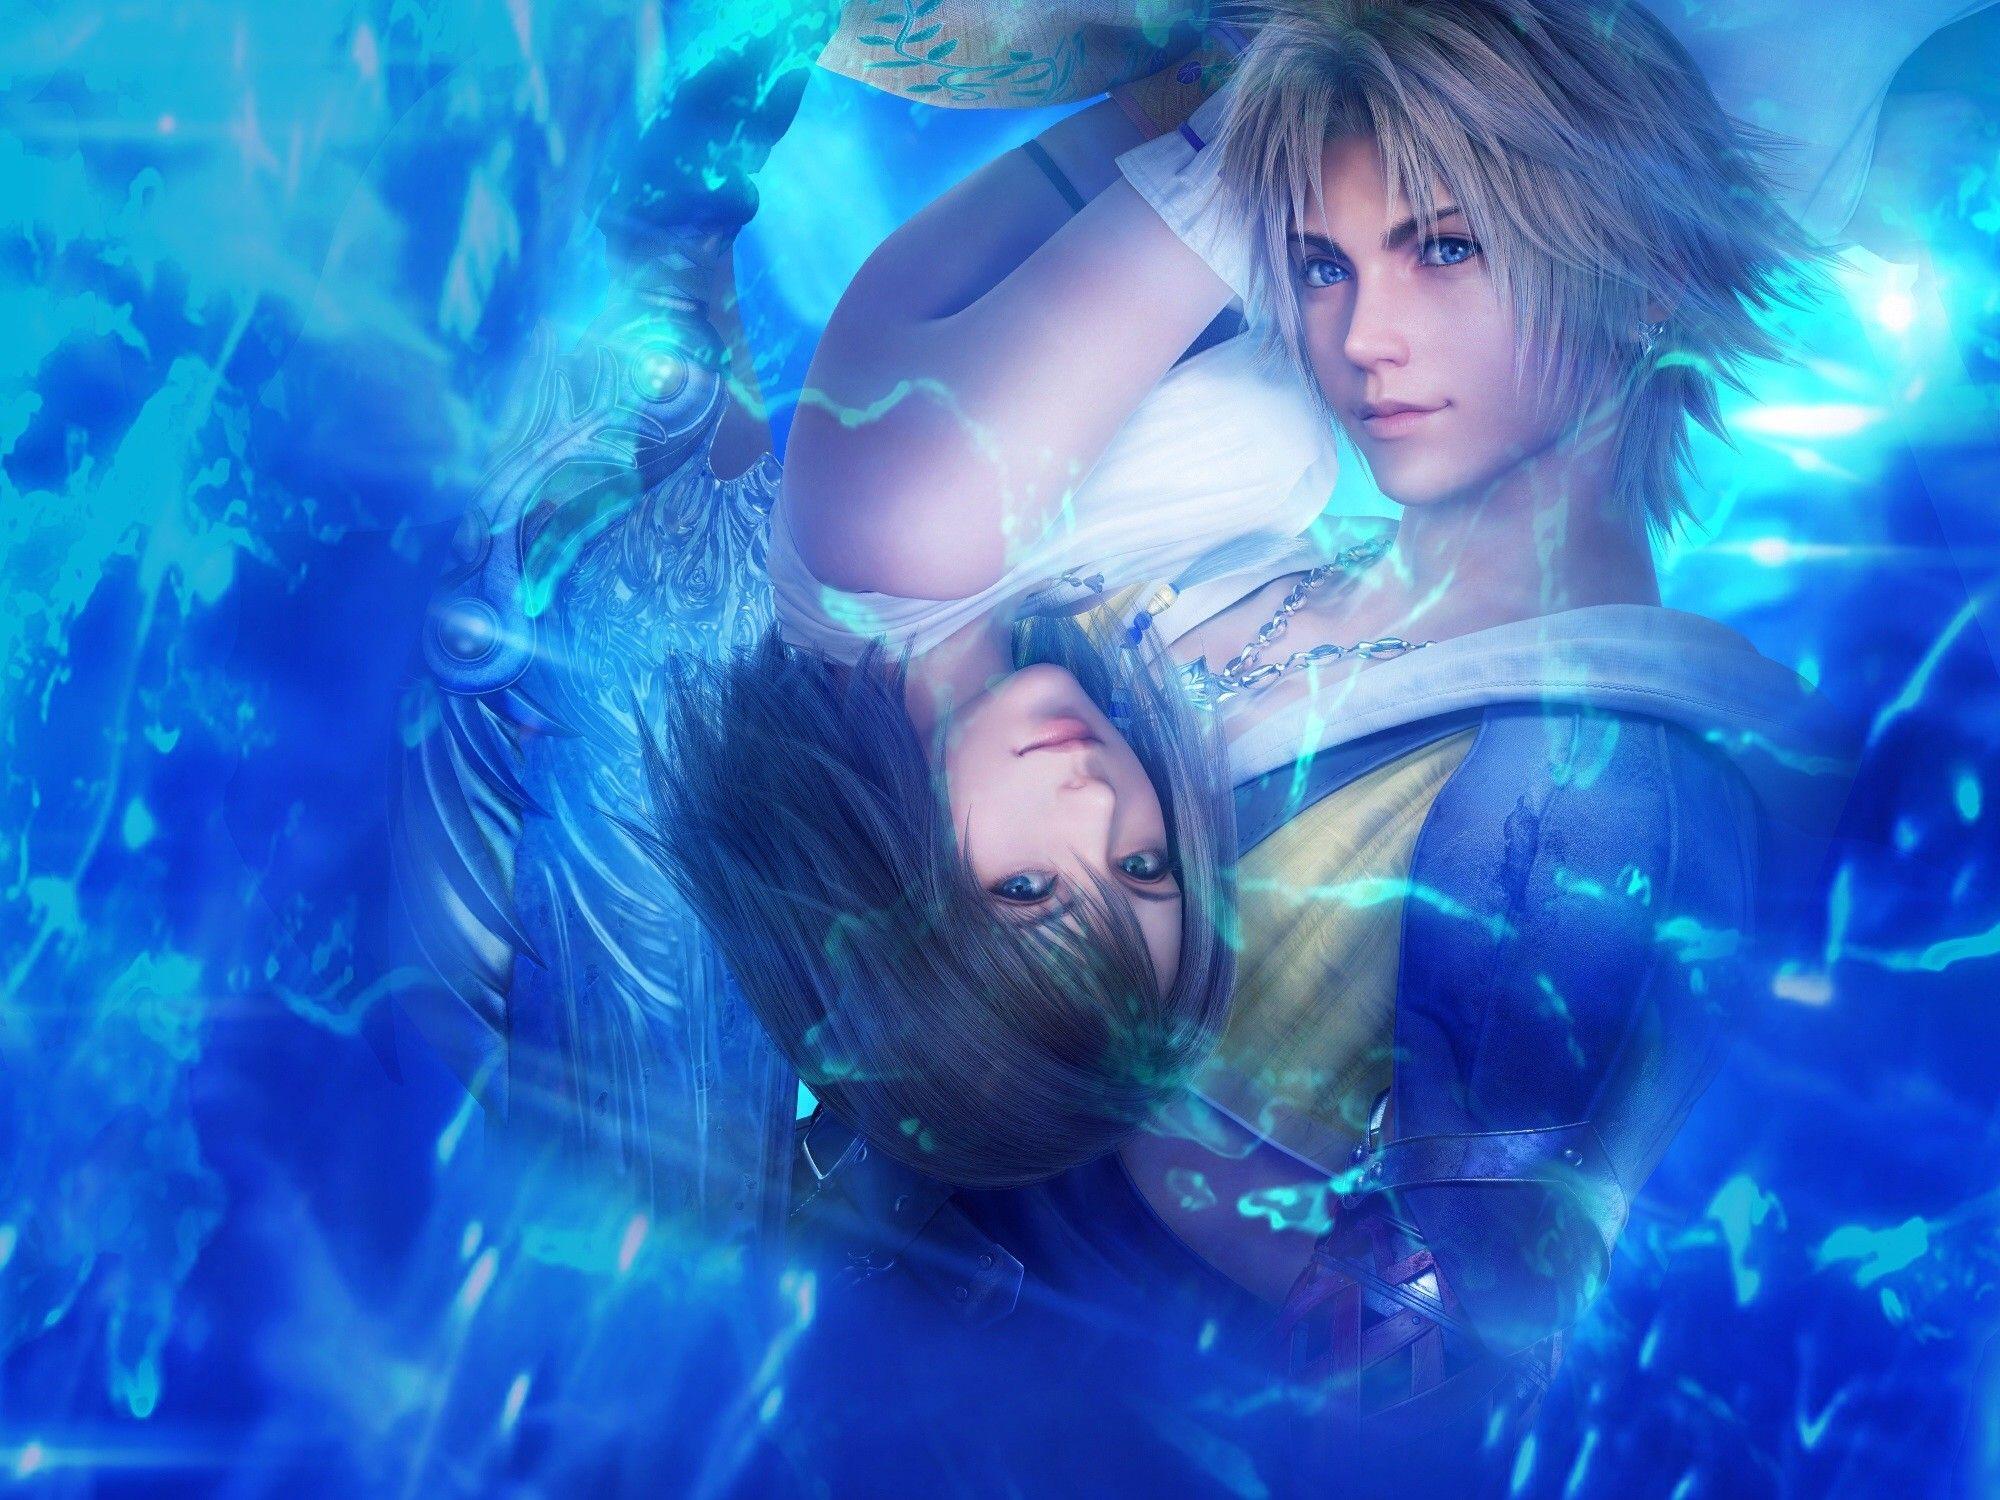 Final Fantasy X Wallpapers Top Free Final Fantasy X Backgrounds Wallpaperaccess